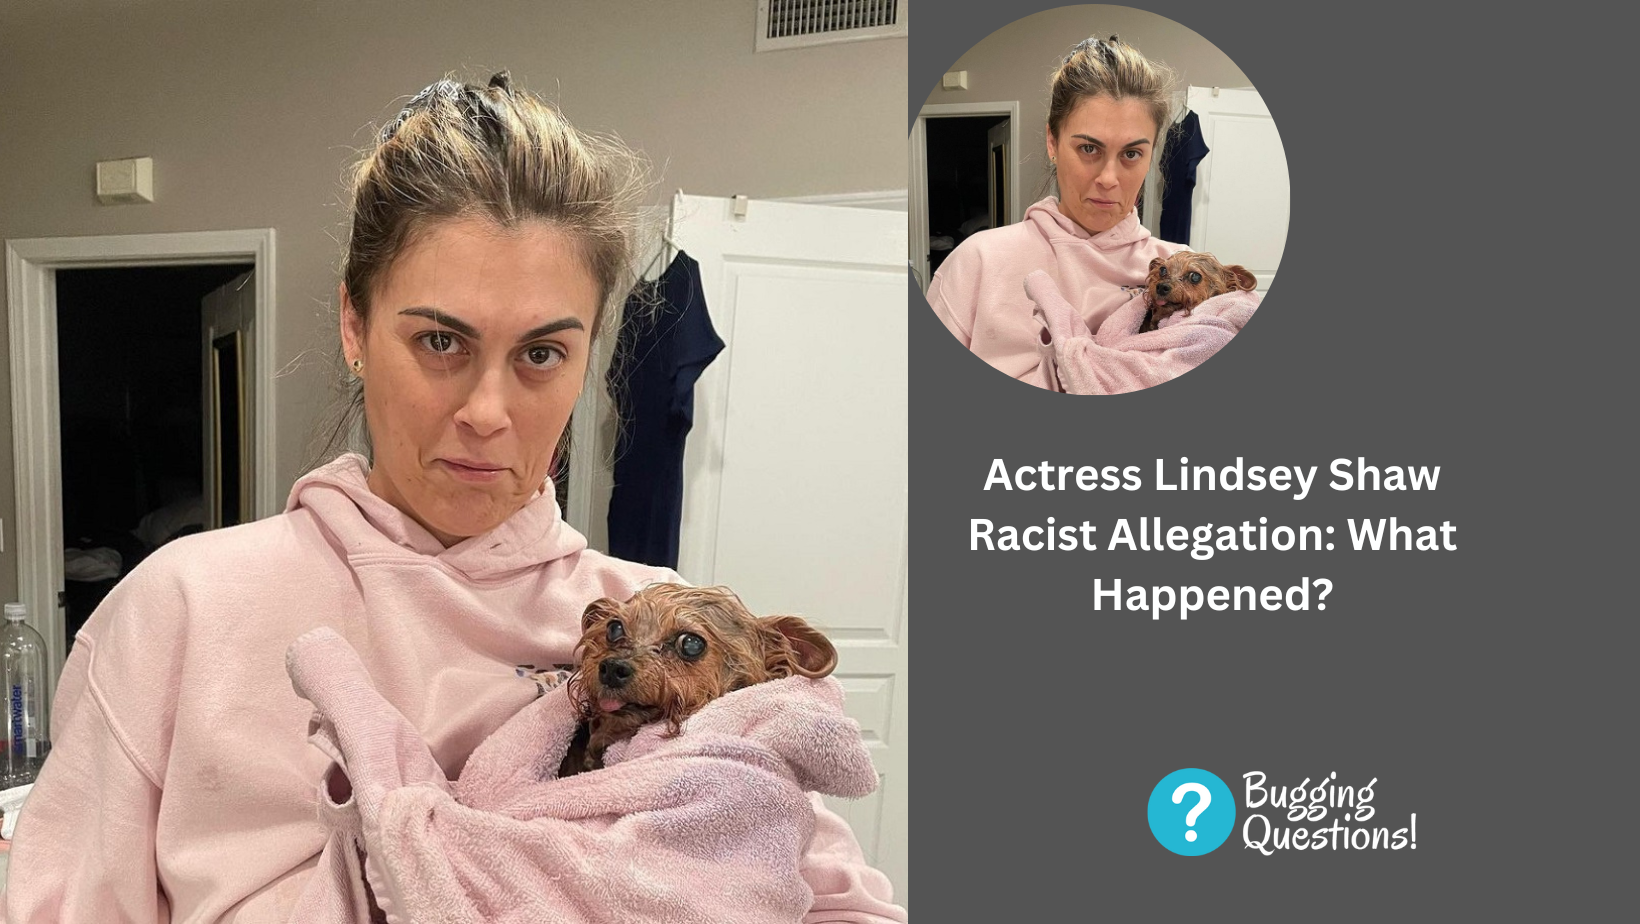 Actress Lindsey Shaw Racist Allegation: What Happened?